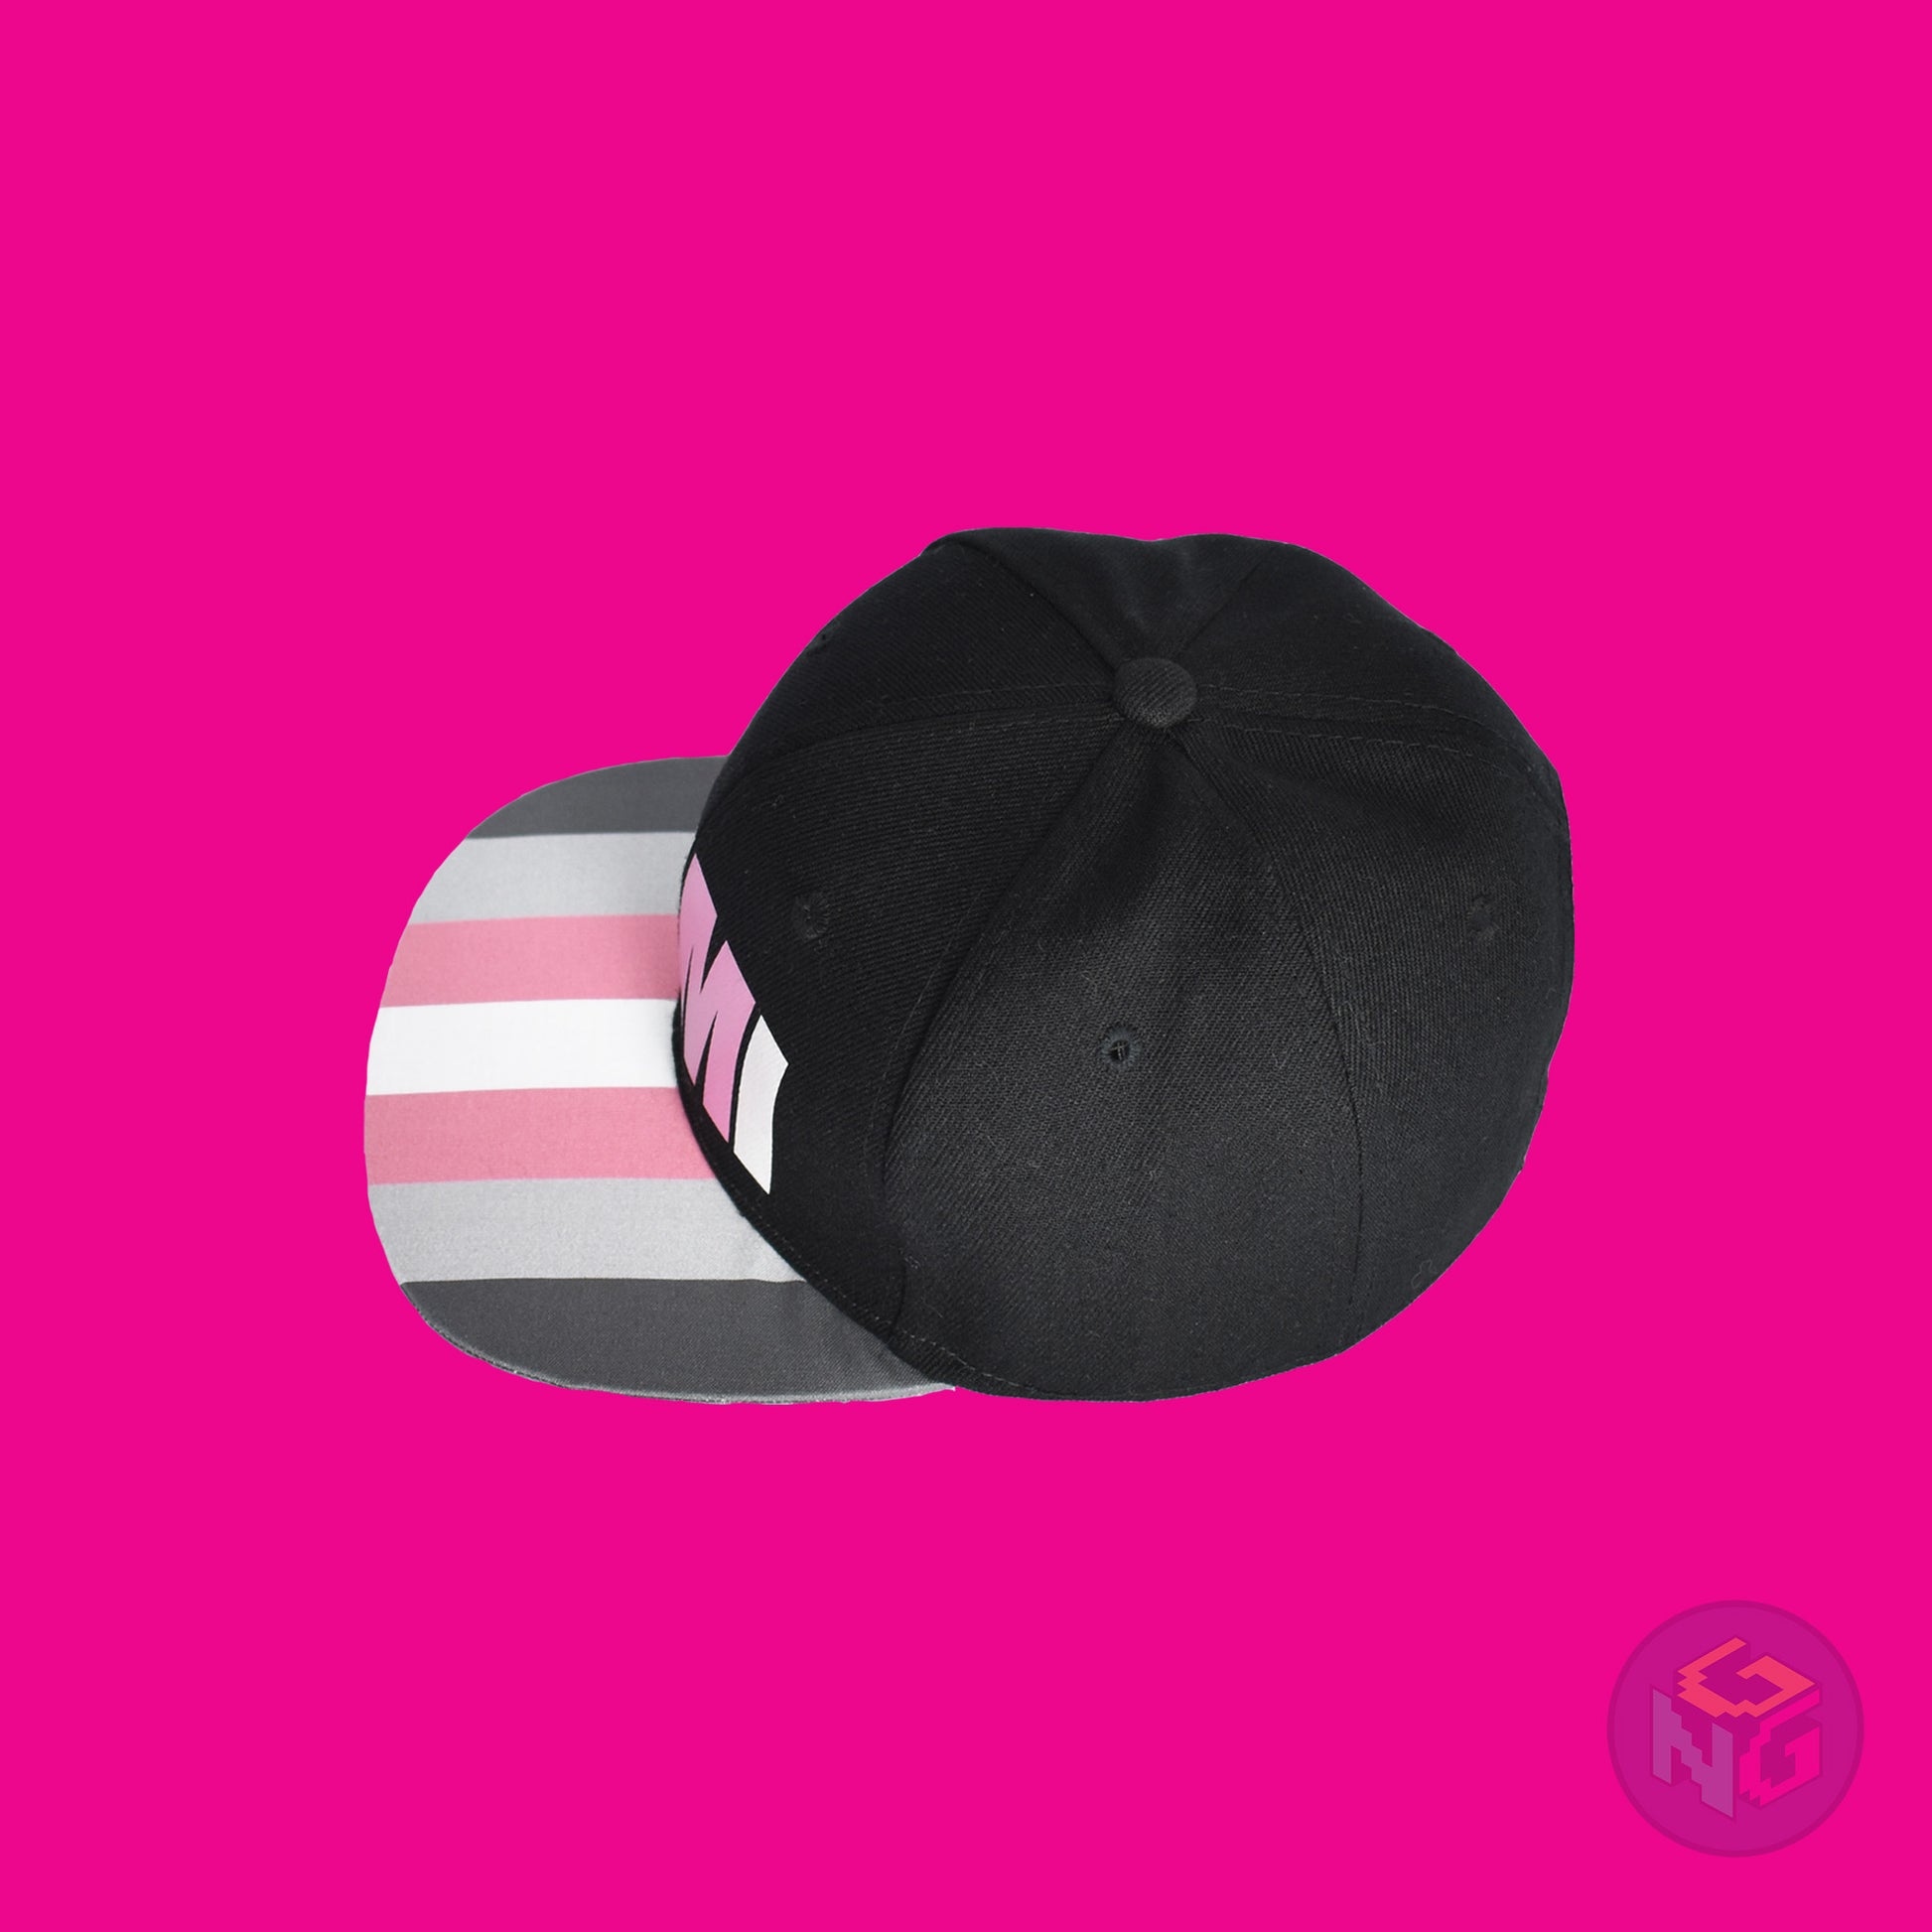 Black flat bill snapback hat. The brim has the demigirl pride flag on both sides and the front of the hat has the word “DEMI” in dark grey, light grey, pink, and white. Top left view